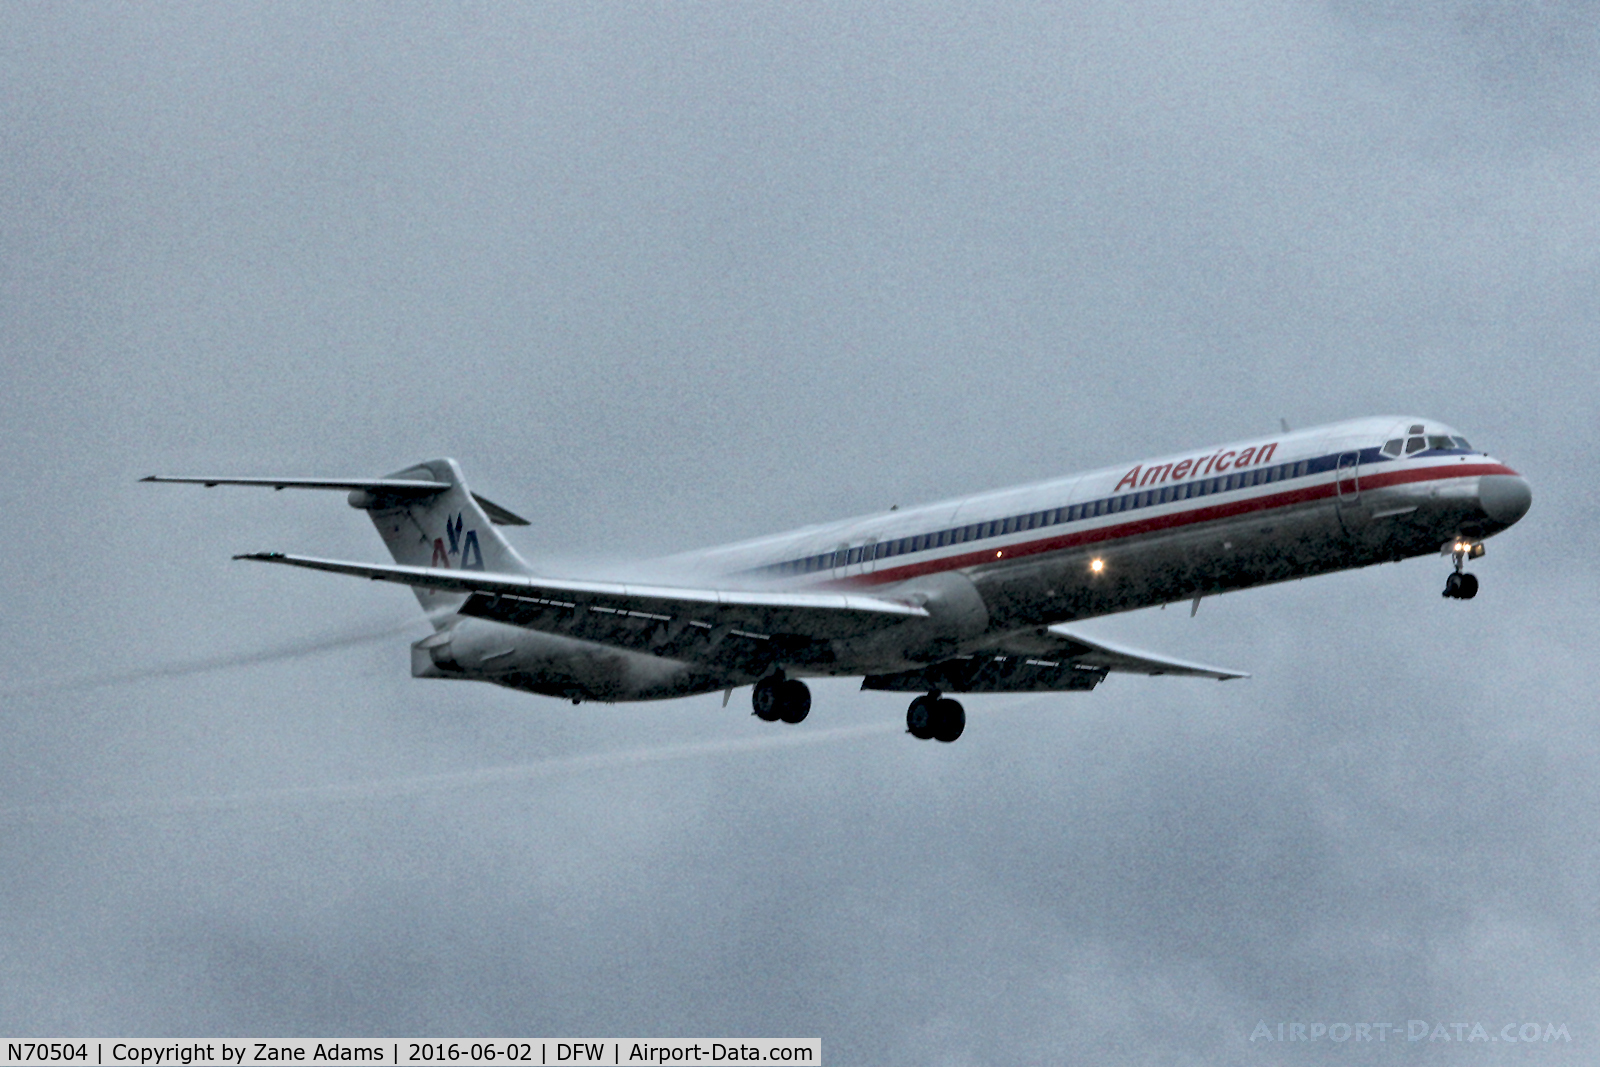 N70504, 1989 McDonnell Douglas MD-82 (DC-9-82) C/N 49798, Arriving at DFW Airport